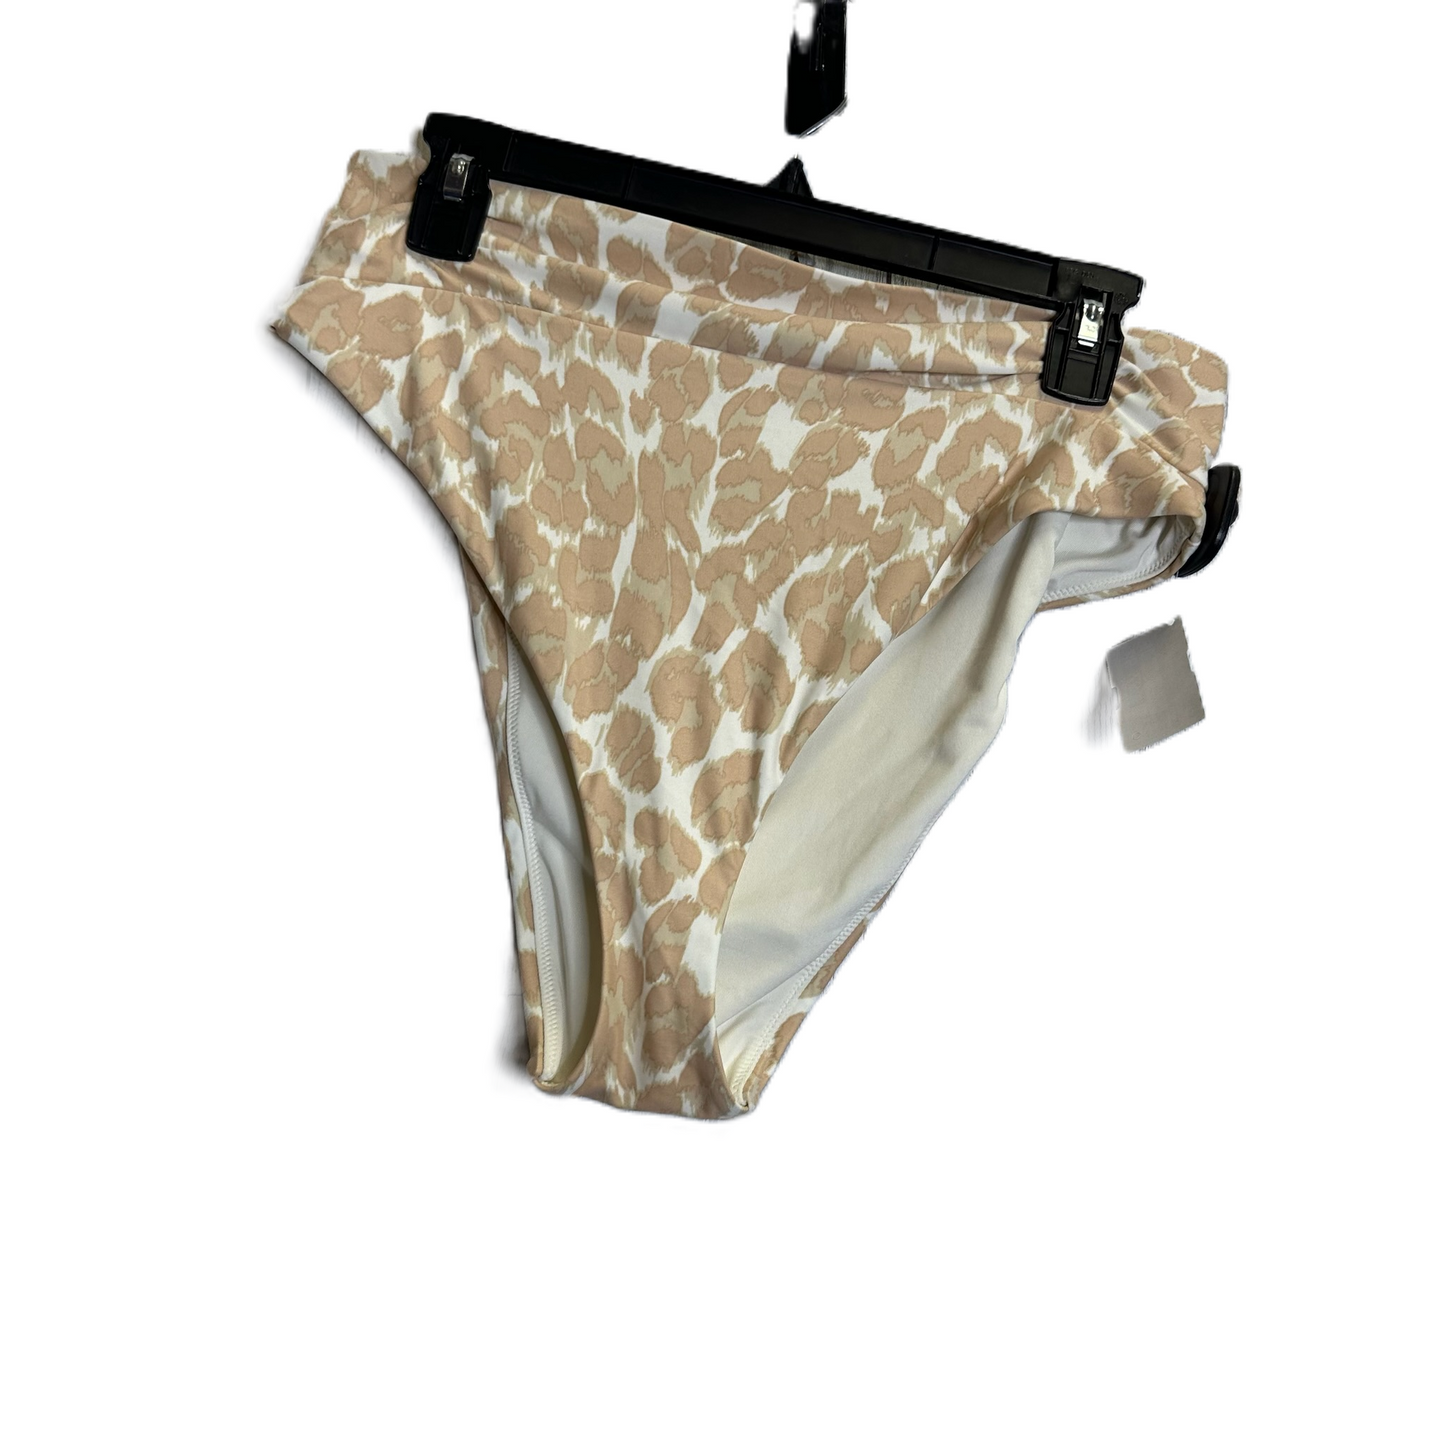 Animal Print Swimsuit Bottom By Aerie, Size: Xl